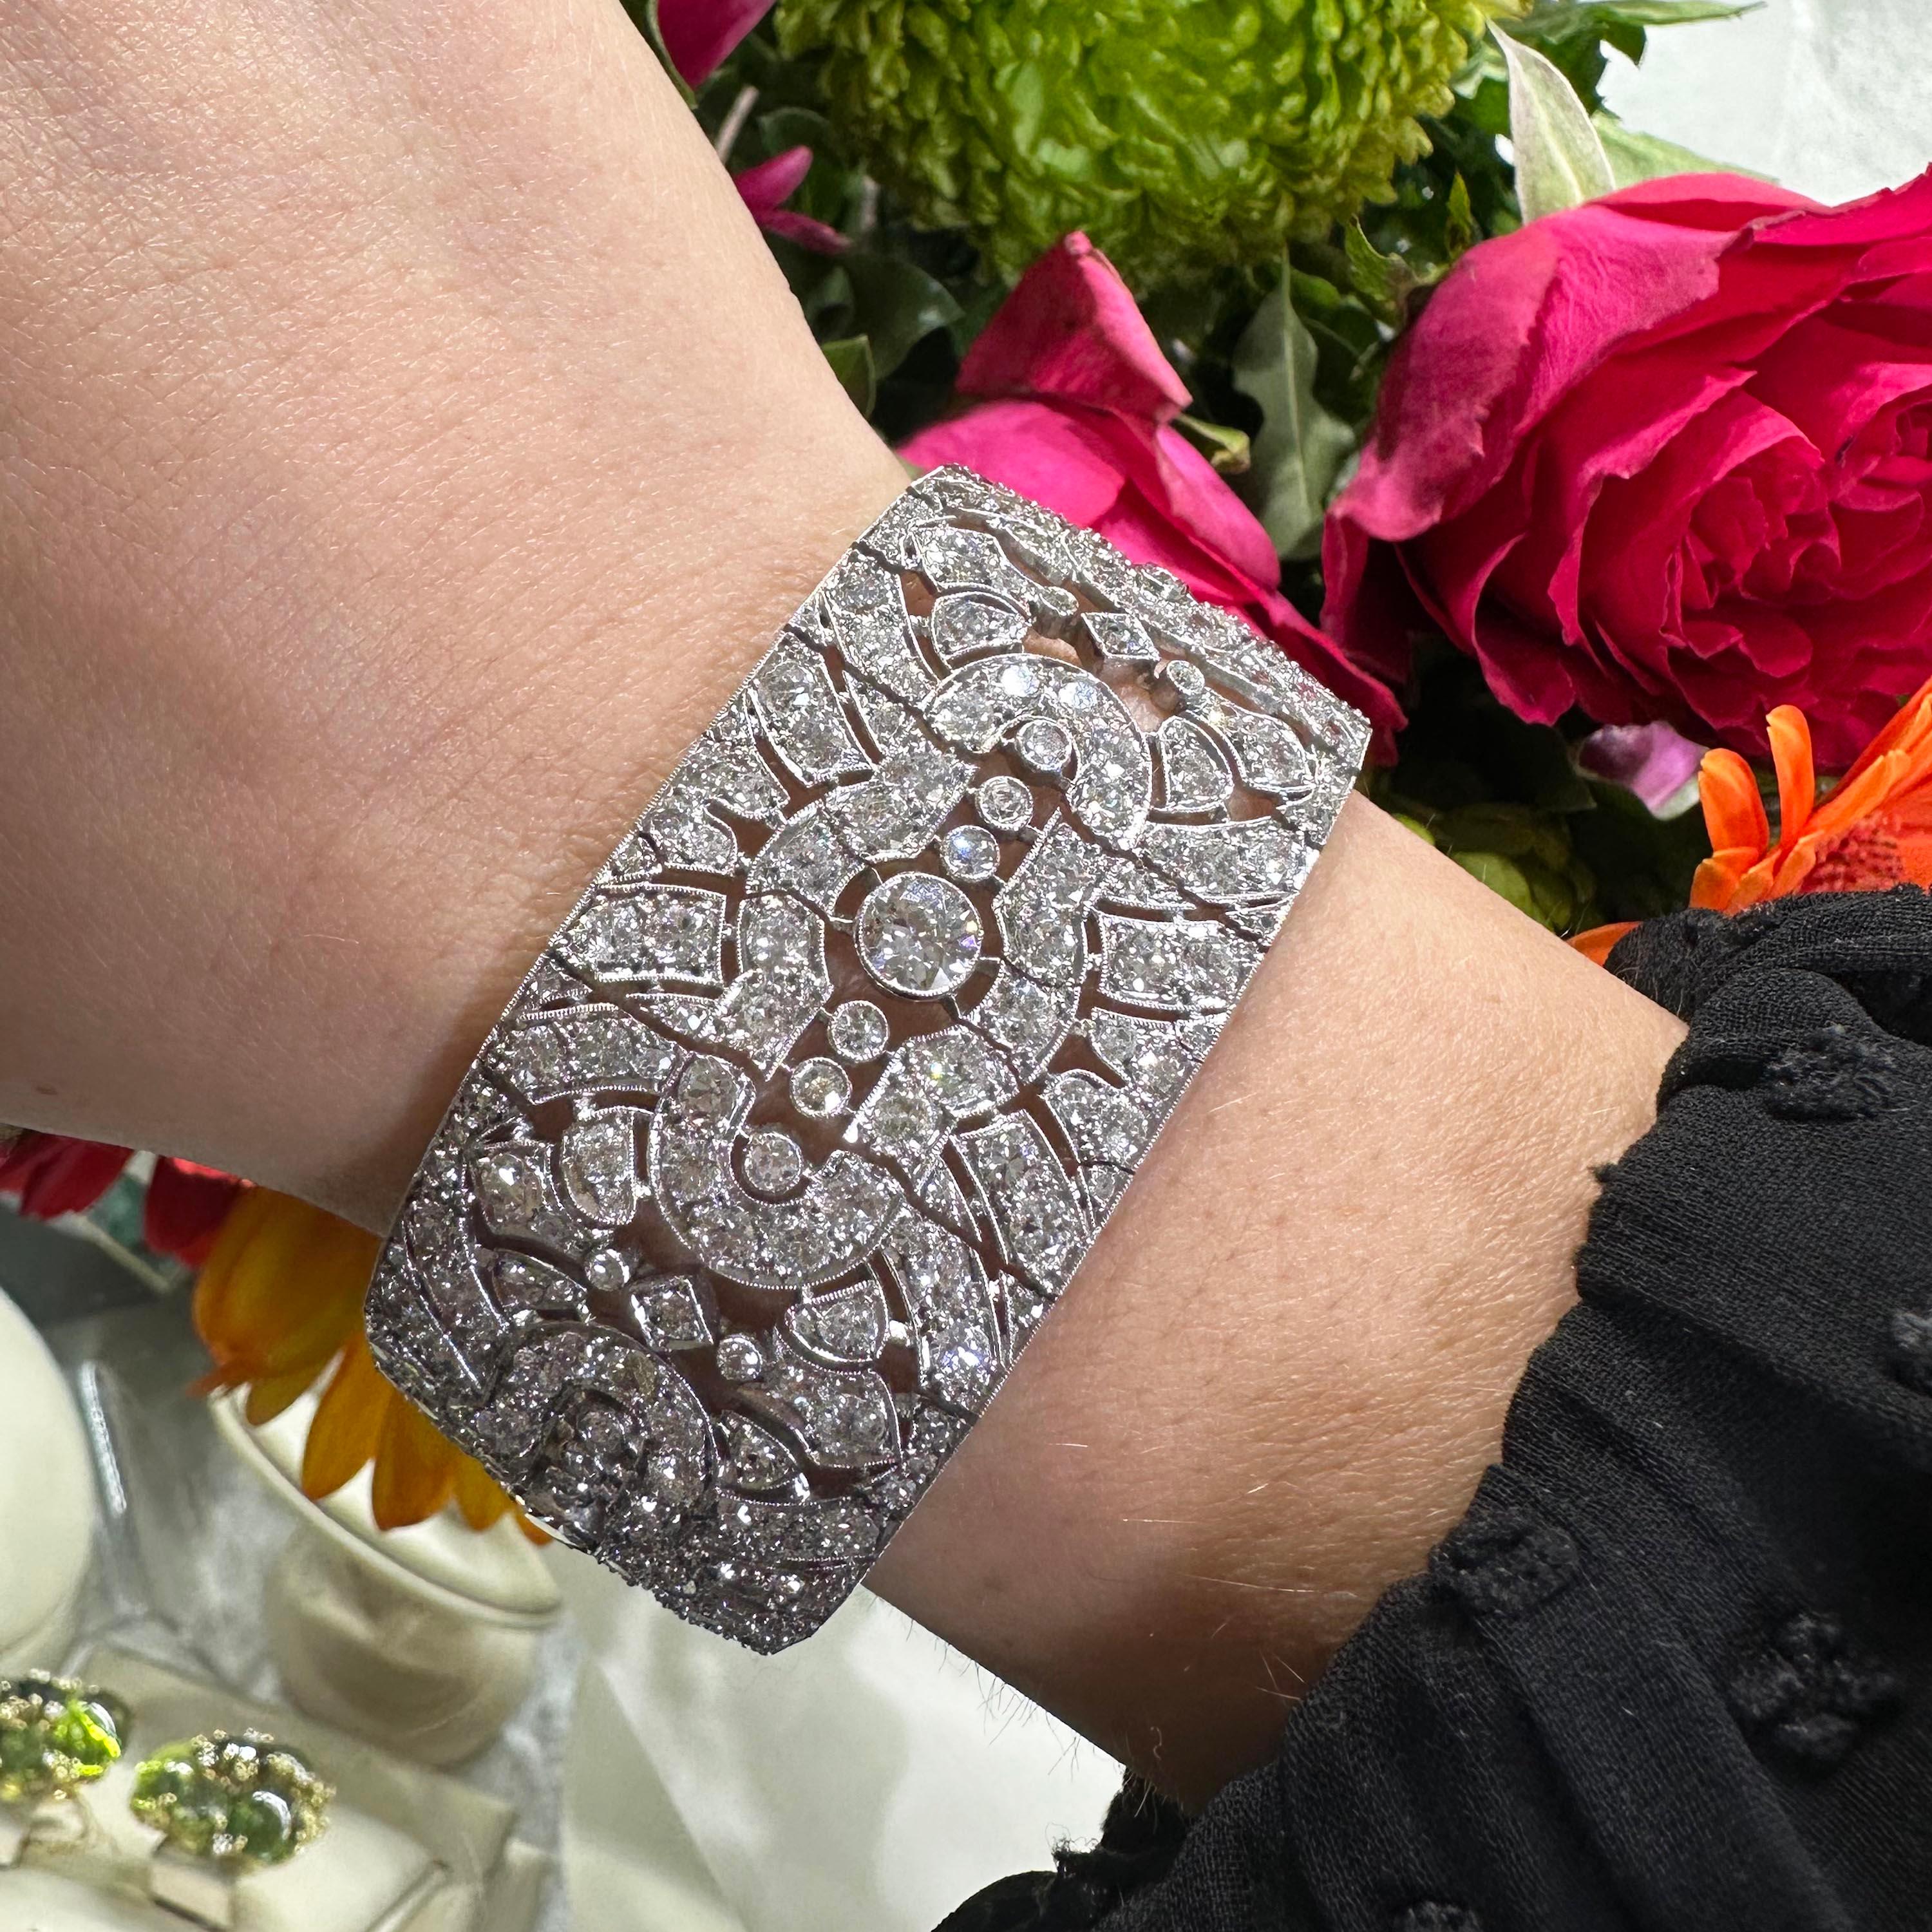 A French diamond and platinum Art Deco bracelet, with a diamond set repeating openwork pattern of five motifs, with an Edwardian-cut diamond set in the centre of each motif, with three Edwardian or eight-cut diamonds either side, in rub over